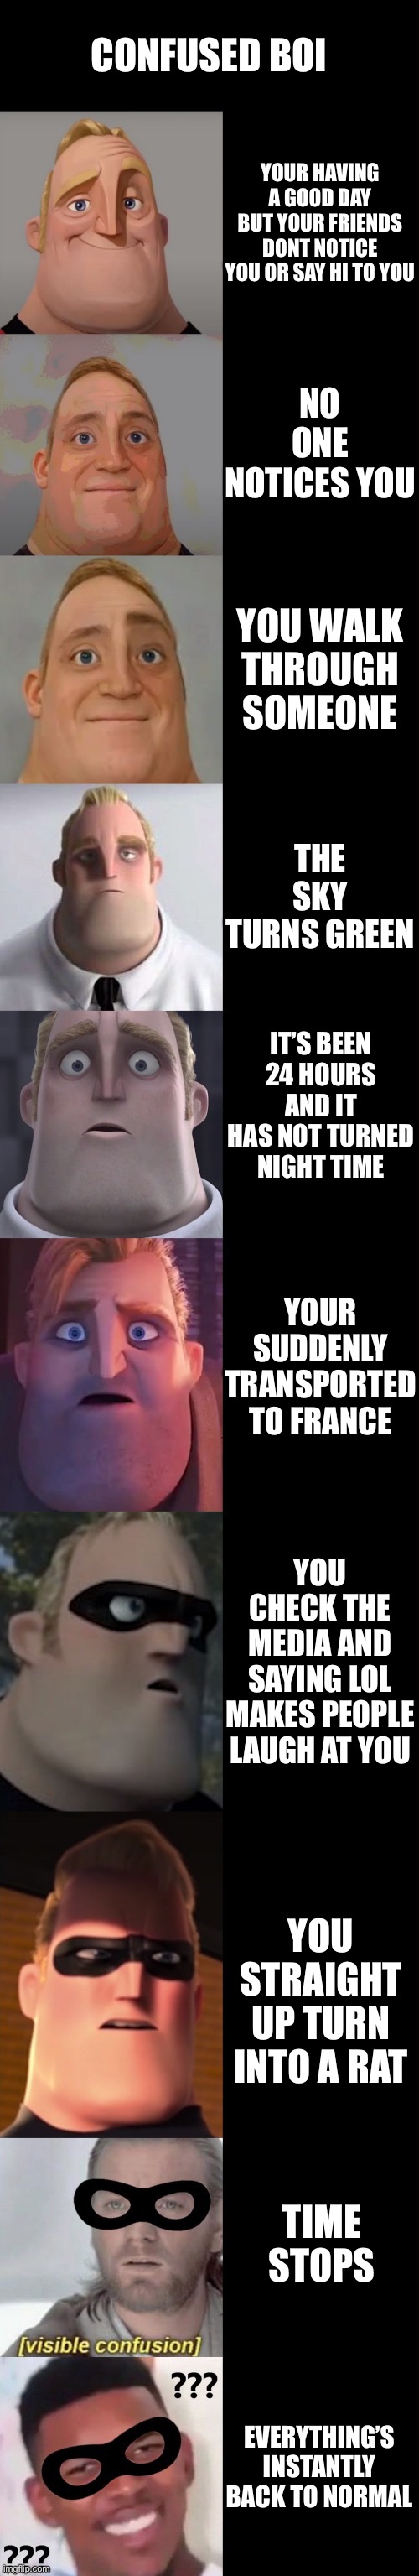 Mr Incredible becoming confused | CONFUSED BOI; YOUR HAVING A GOOD DAY BUT YOUR FRIENDS DONT NOTICE YOU OR SAY HI TO YOU; NO ONE NOTICES YOU; YOU WALK THROUGH SOMEONE; THE SKY TURNS GREEN; IT’S BEEN 24 HOURS AND IT HAS NOT TURNED NIGHT TIME; YOUR SUDDENLY TRANSPORTED TO FRANCE; YOU CHECK THE MEDIA AND SAYING LOL MAKES PEOPLE LAUGH AT YOU; YOU STRAIGHT UP TURN INTO A RAT; TIME STOPS; EVERYTHING’S INSTANTLY BACK TO NORMAL | image tagged in mr incredible becoming confused | made w/ Imgflip meme maker